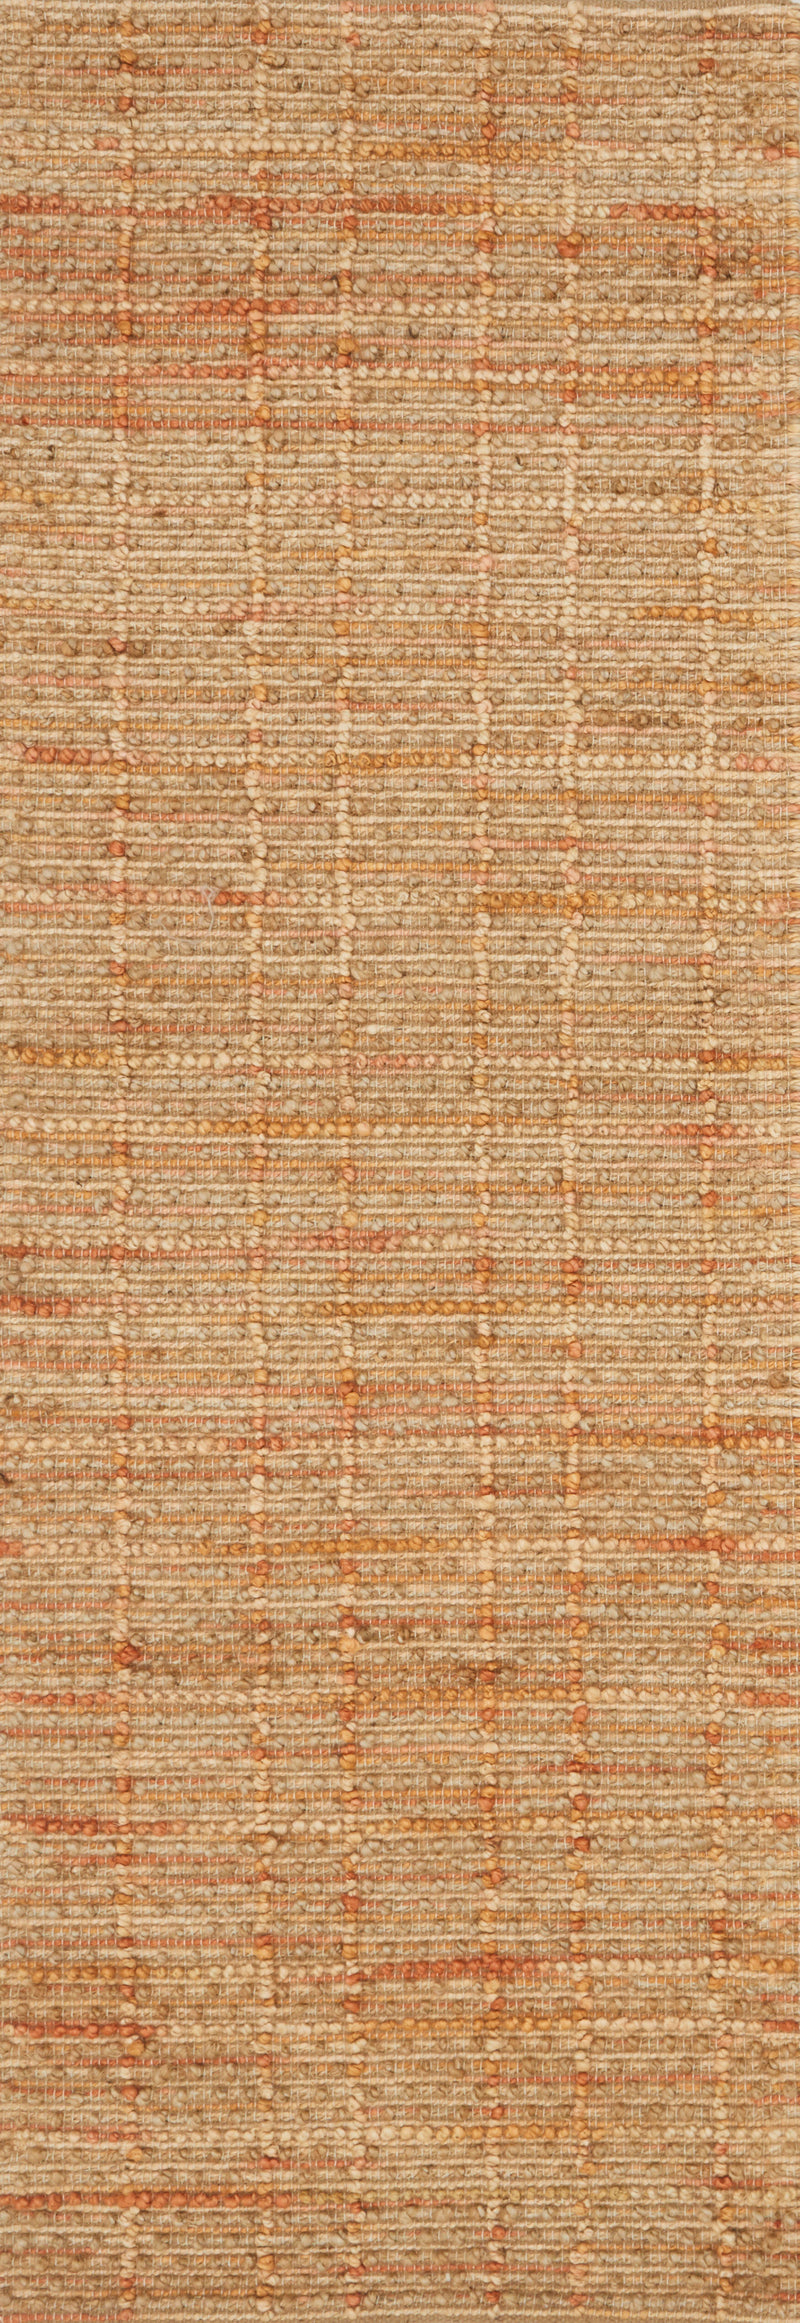 BEACON Collection Wool/Viscose Rug  in  TANGERINE Orange Accent Hand-Woven Wool/Viscose